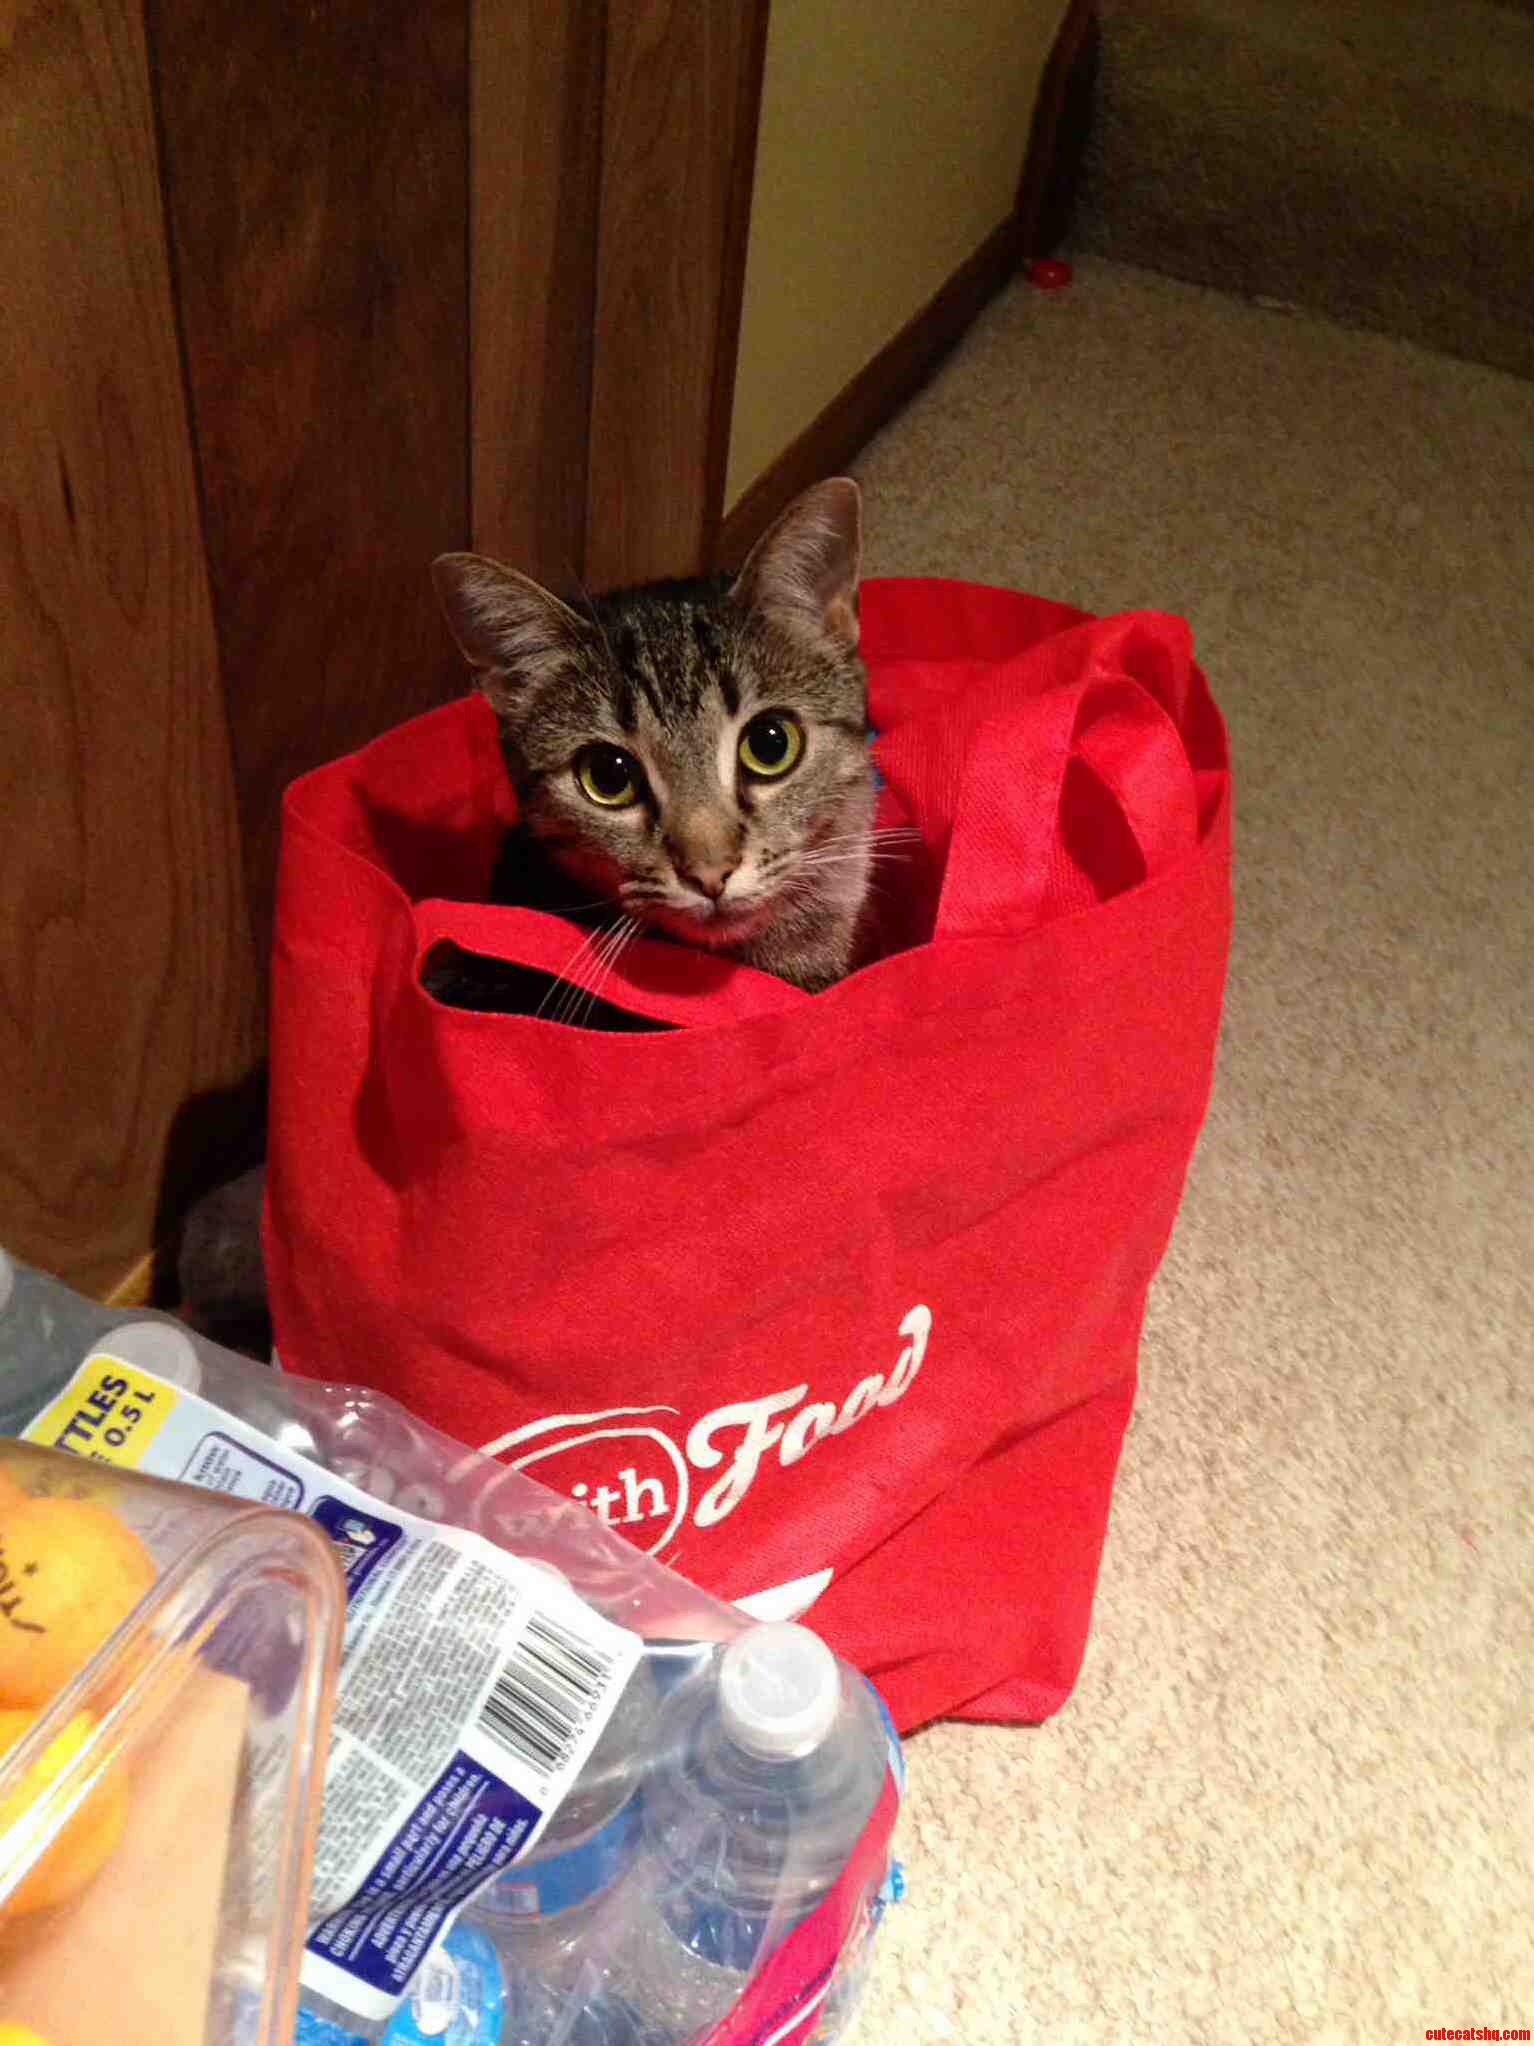 She Thinks Shes Groceries